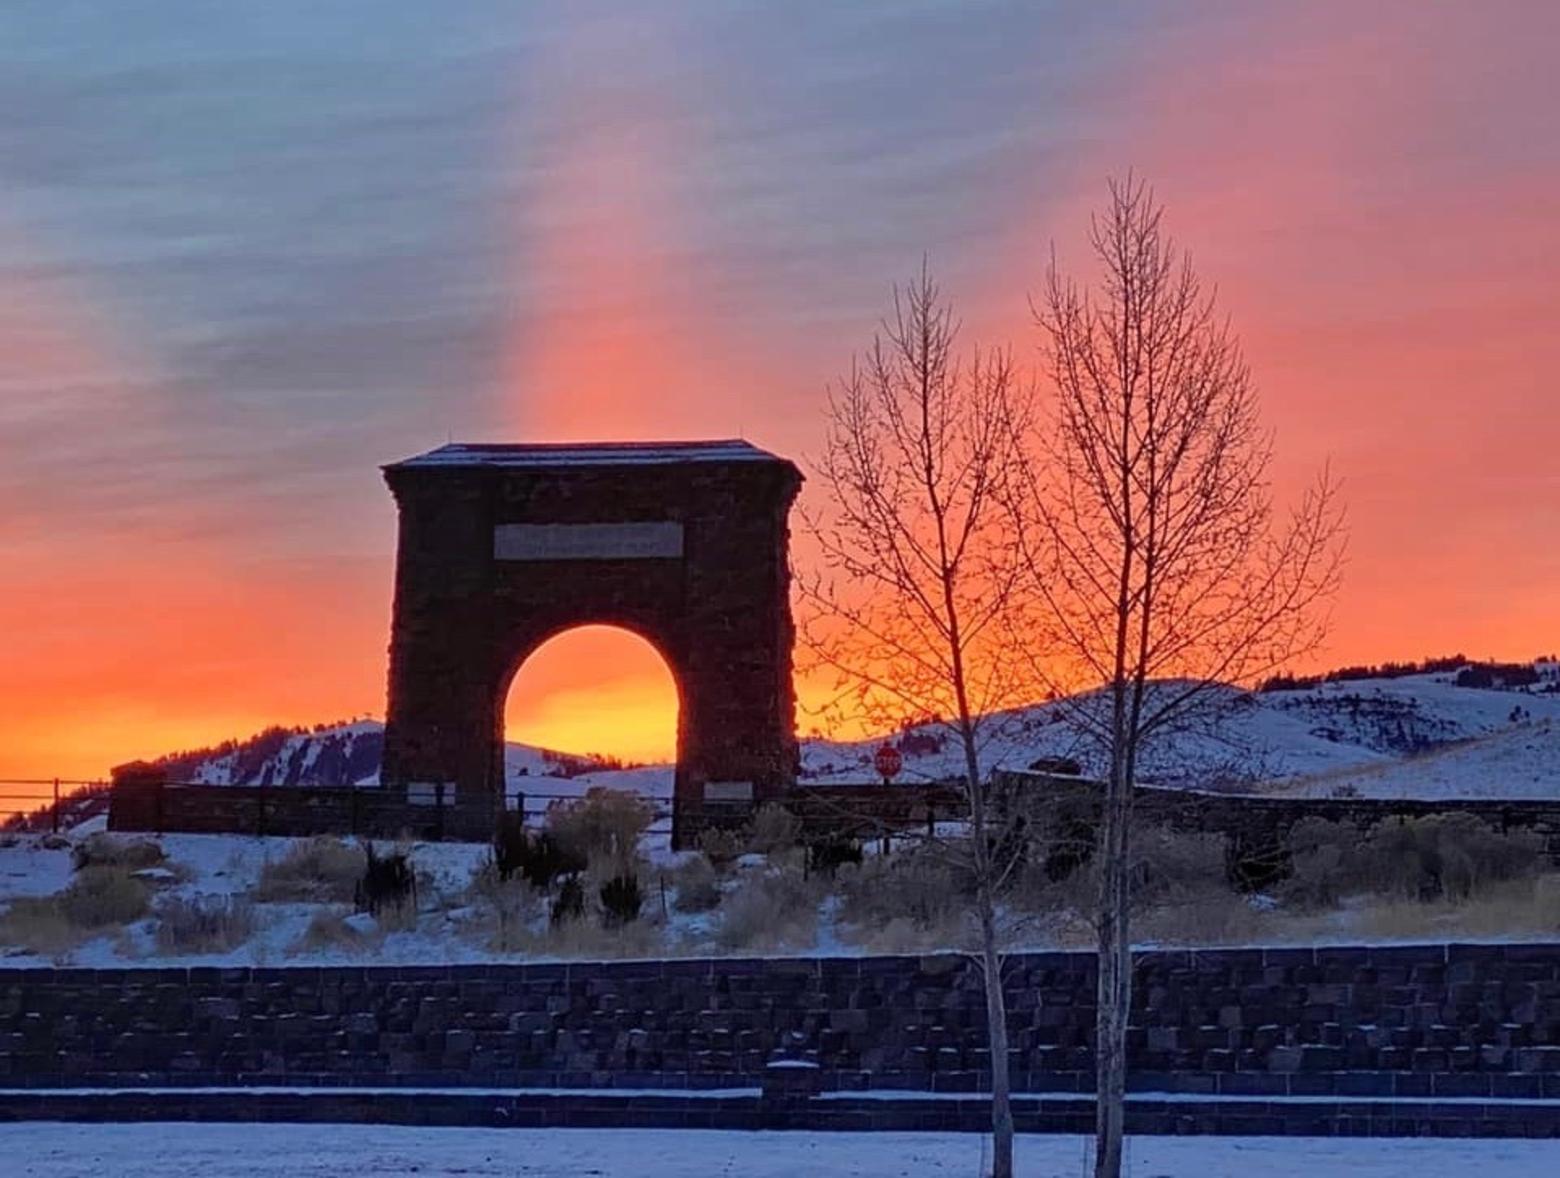 Roosevelt Arch rises into the air of a gloaming sunset on the edge of Gardiner, Montana at the northern entrance to Yellowstone. Photo courtesy Golding/Bumann